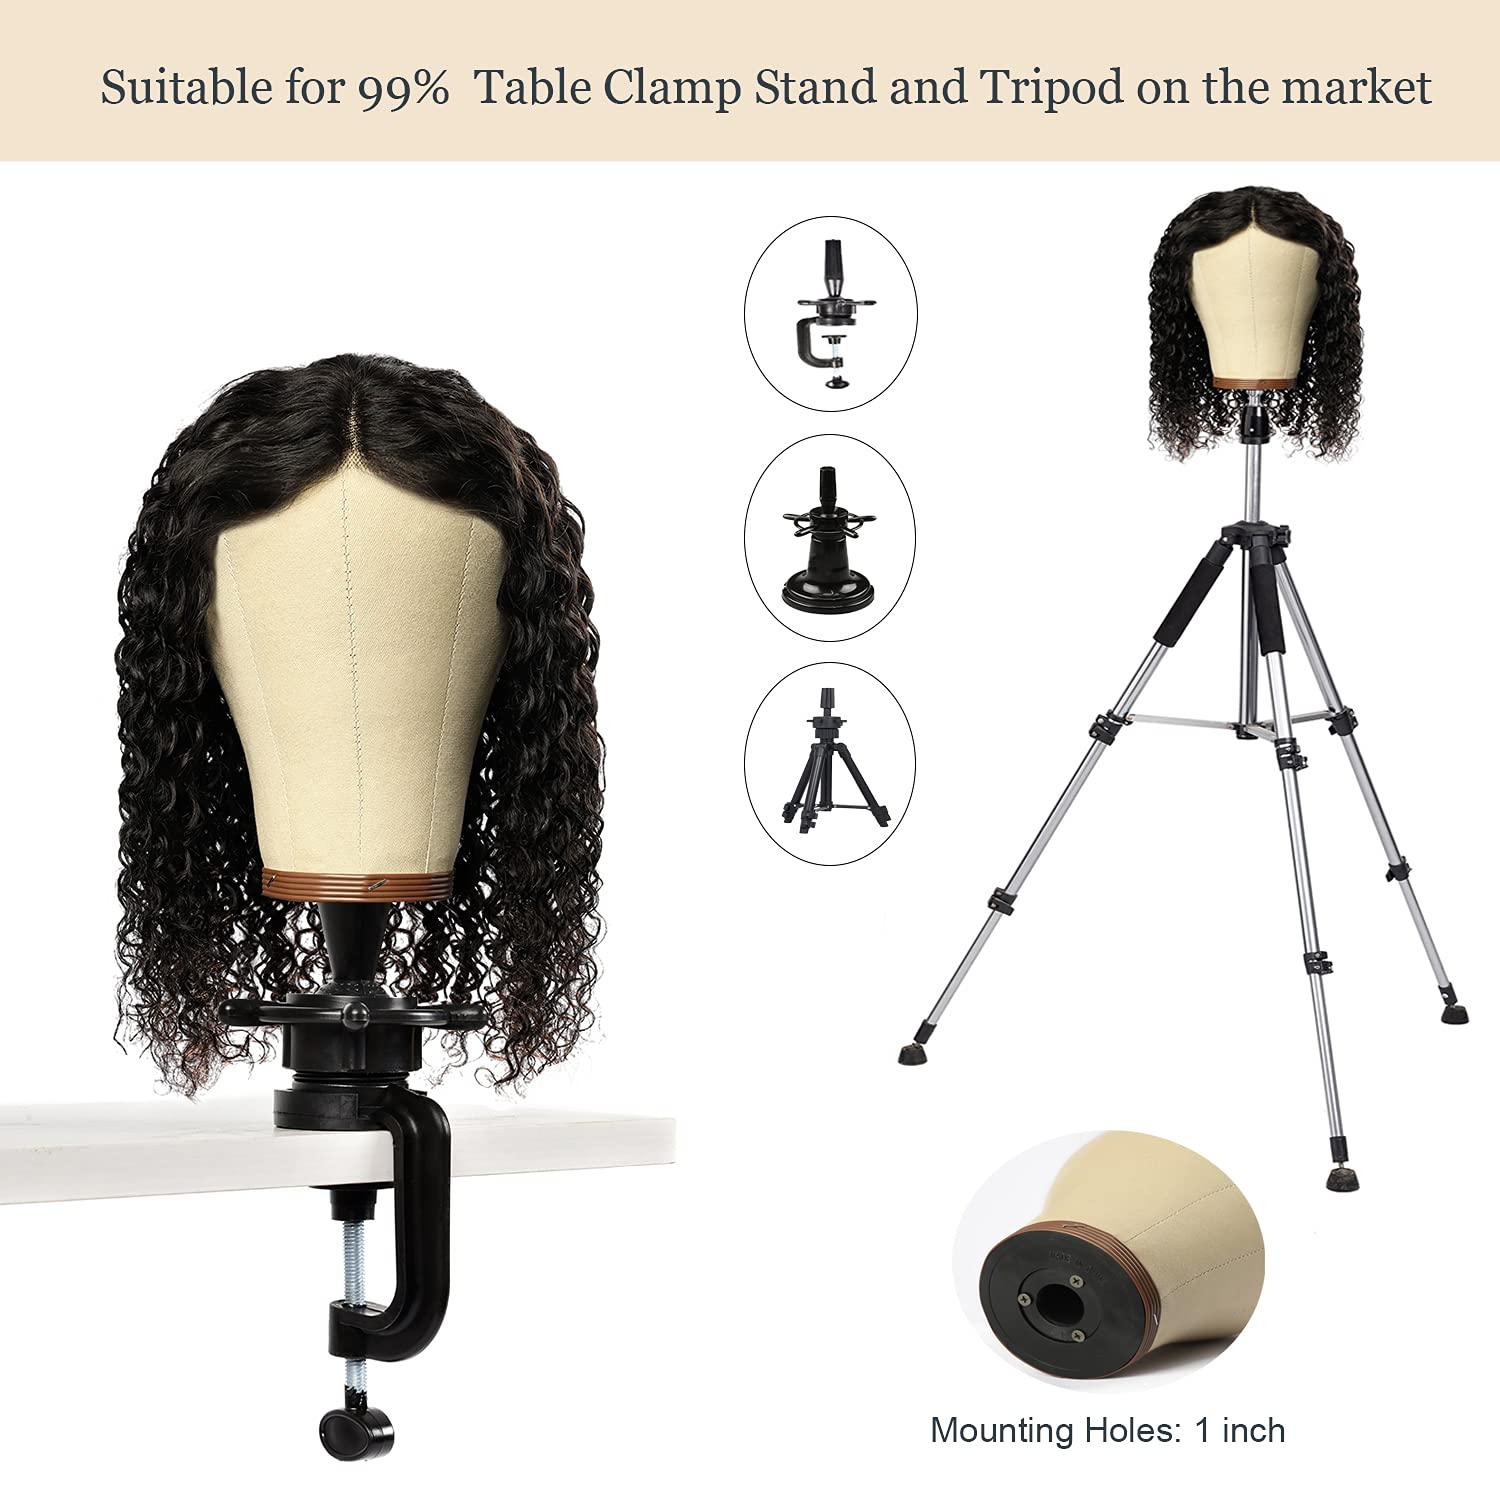 Wig Head Stand Mannequin Head 20-24 Dome Cork Canvas Manican